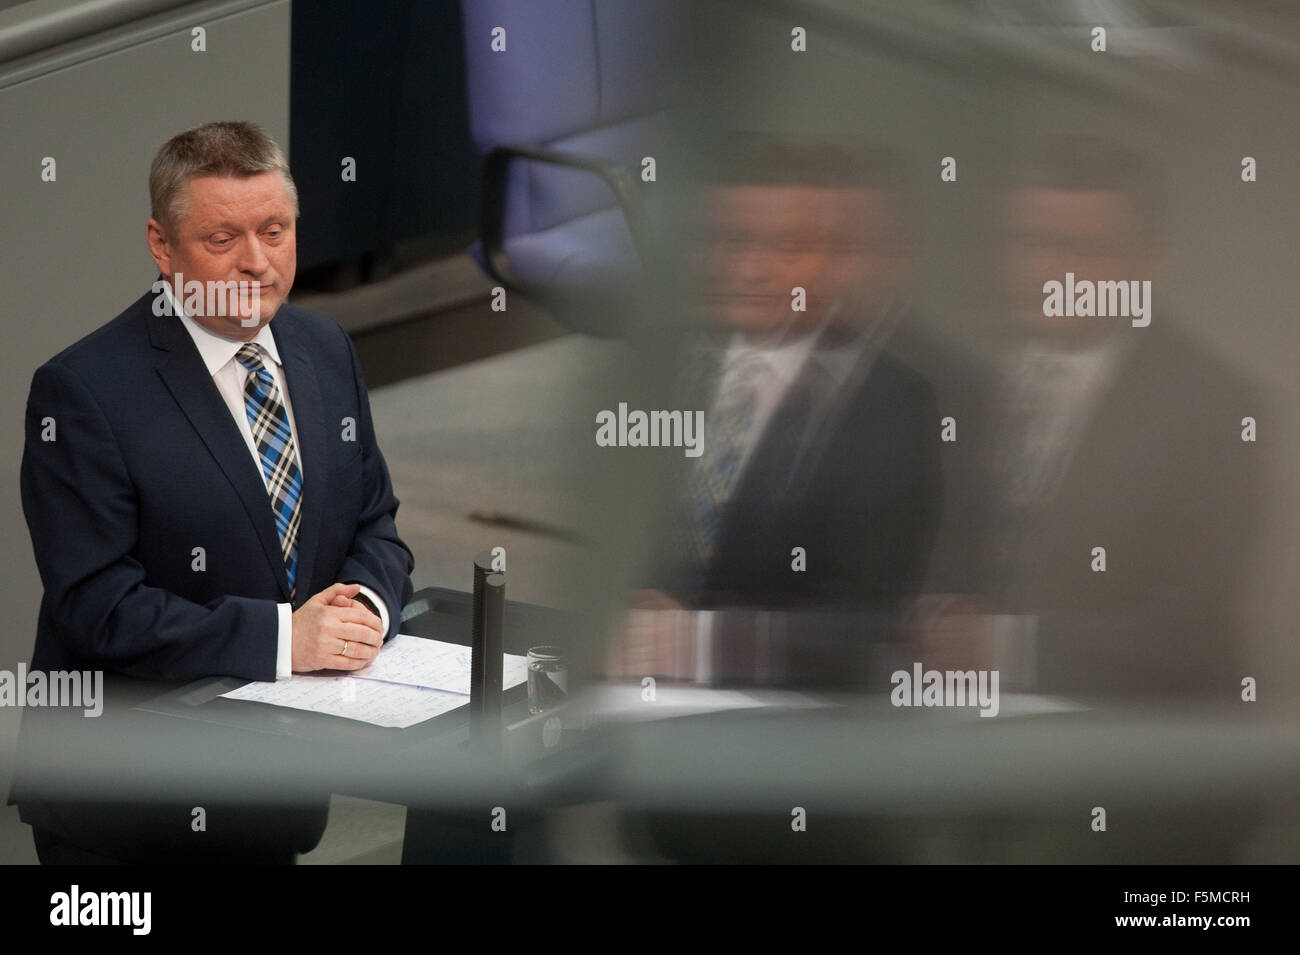 Berlin, Germany. 6th Nov, 2015. German health minister Hermann Groehe (CDU) speaking to the members of the Bundestag during a parliamentary debate on assisted dying in Berlin, Germany, 6 November 2015. Brand is part of a cross-factional group which wants to penalise assisted suicide. Photo: Klaus-Dietmar Gabbert/dpa/Alamy Live News Stock Photo